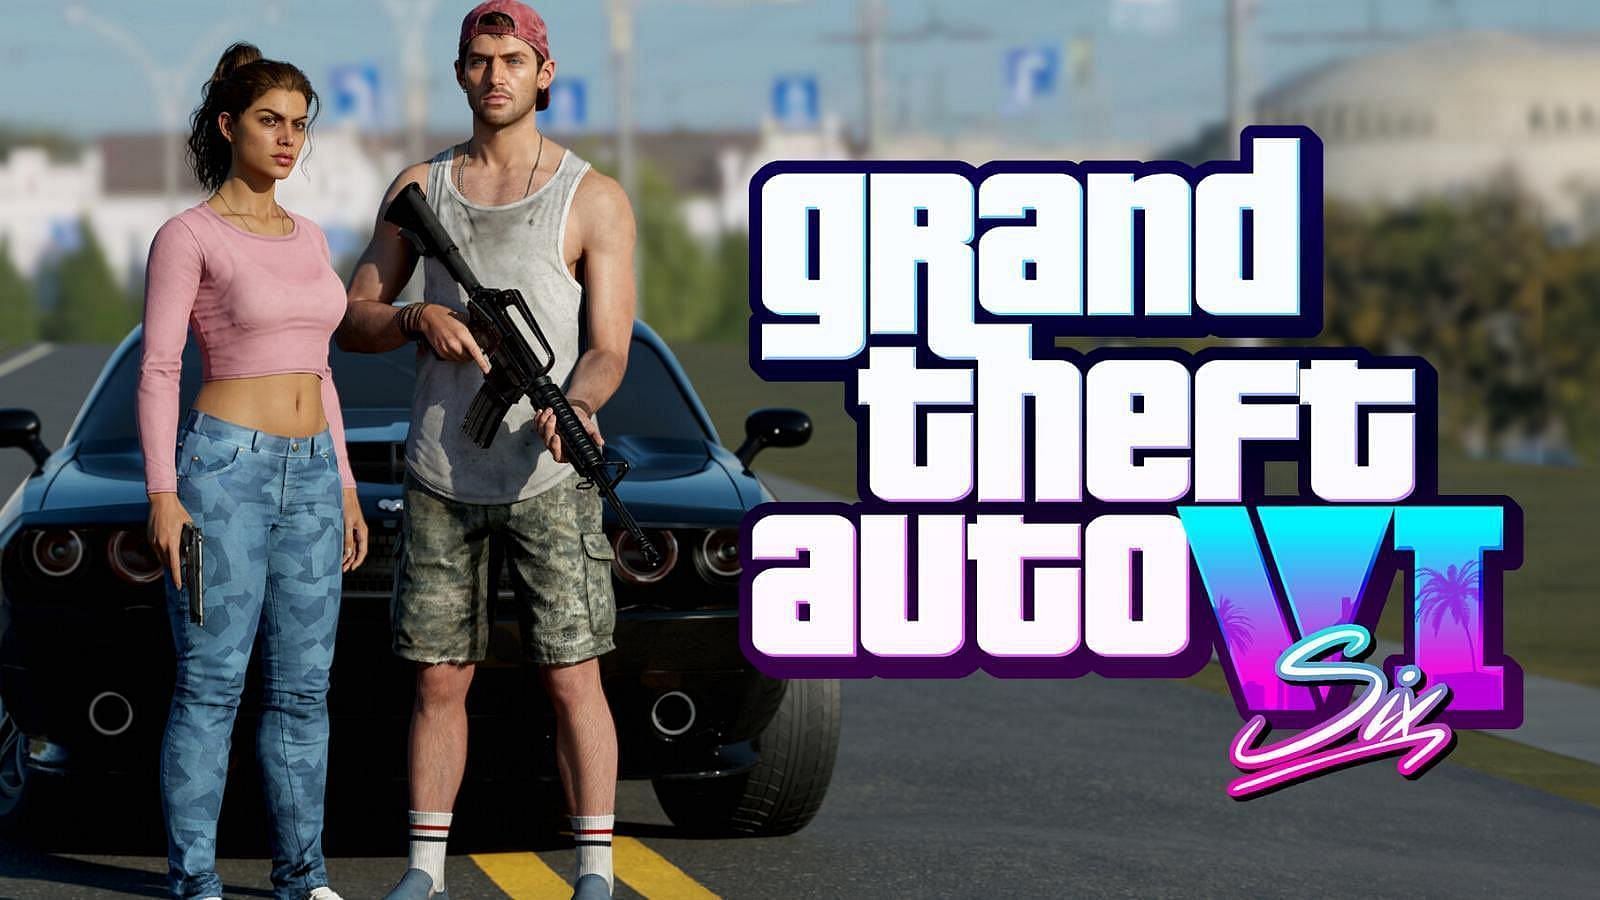 GTA 6 GAMEPLAY - 10 Features We MUST HAVE In This Game! 